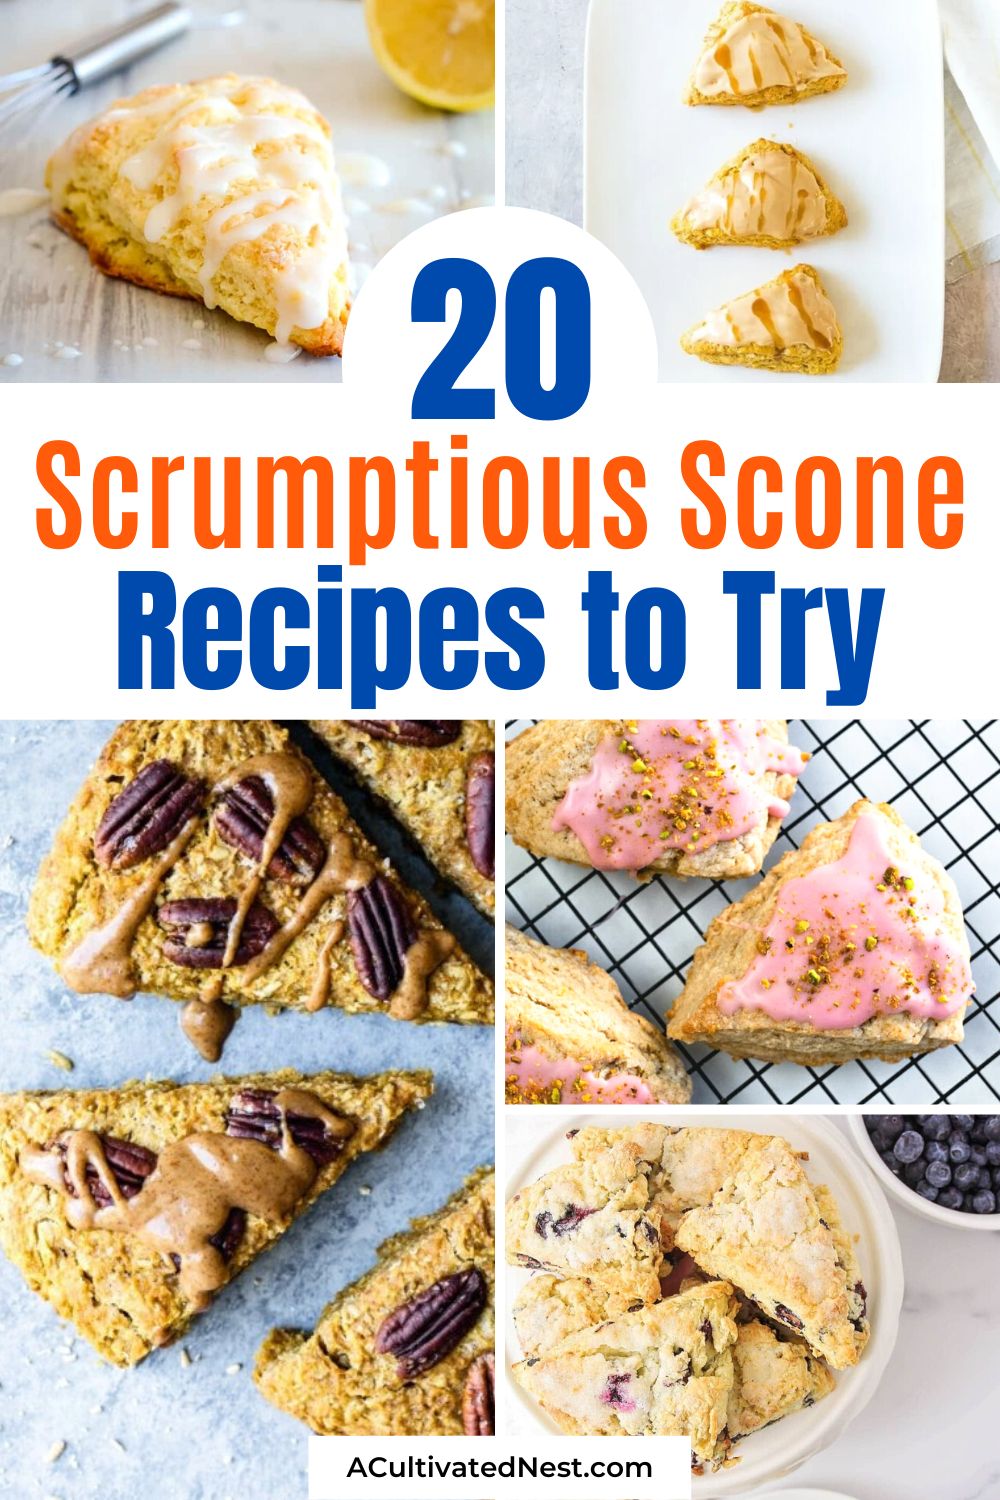 20 Scrumptious Scone Recipes- Want something new and delicious for breakfast or dessert? Then you need to check out these scrumptious scone recipes! There are so many tasty ways to make scones! | scone recipes to bake, baking recipes, #desserts #baking #recipes #bakedGoods #ACultivatedNest